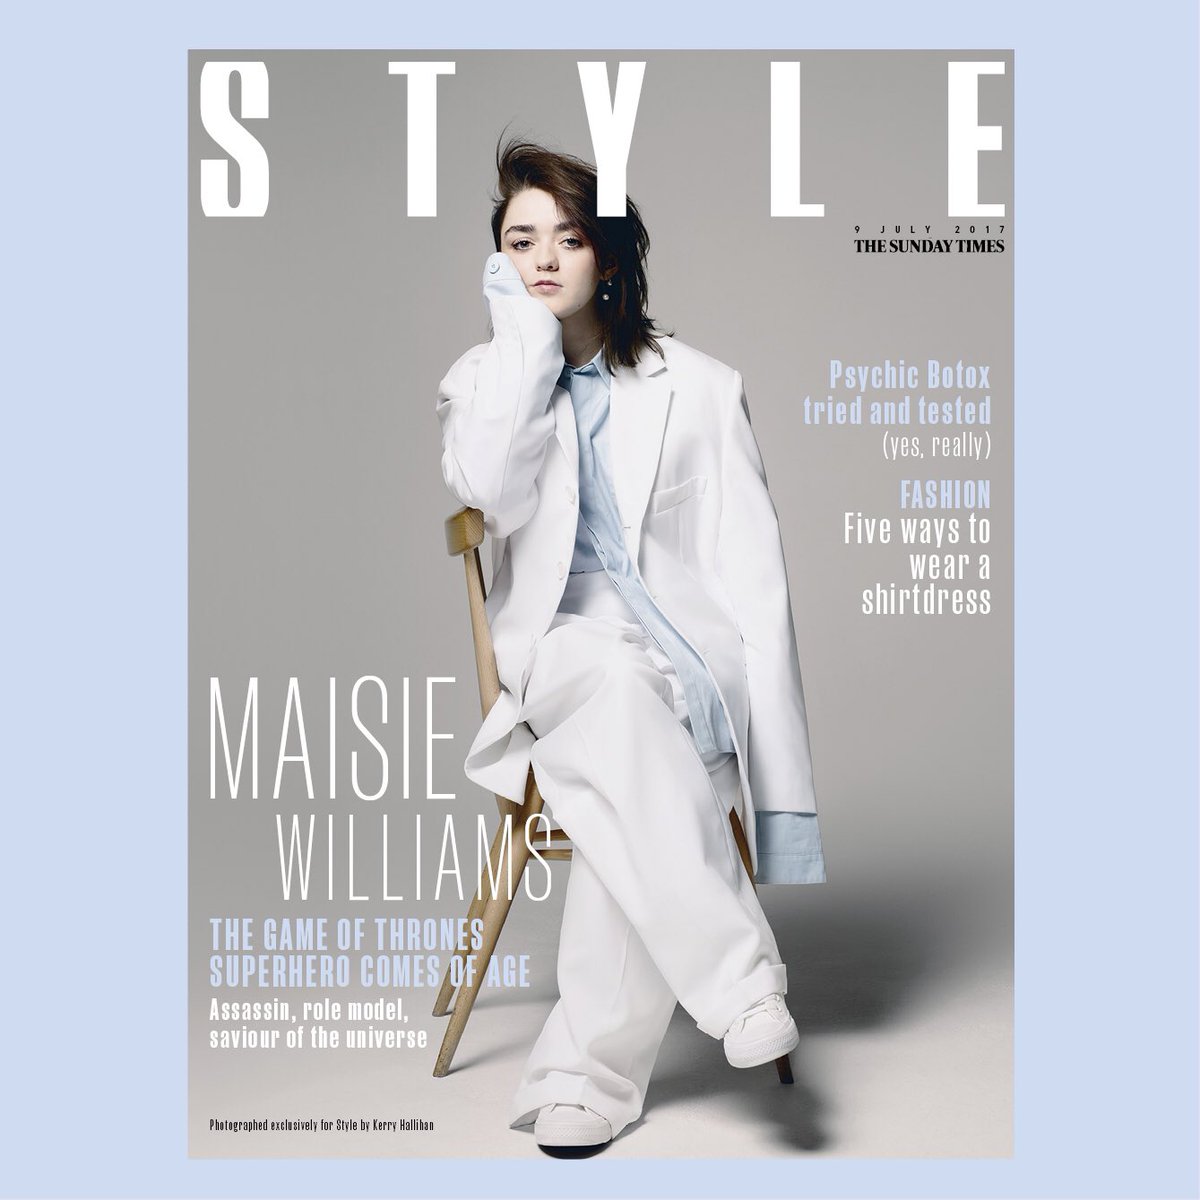 RT @TheSTStyle: Superhero, assassin, role model: the inimitable @Maisie_Williams is our cover star this week.… https://t.co/7bmxePEsp8